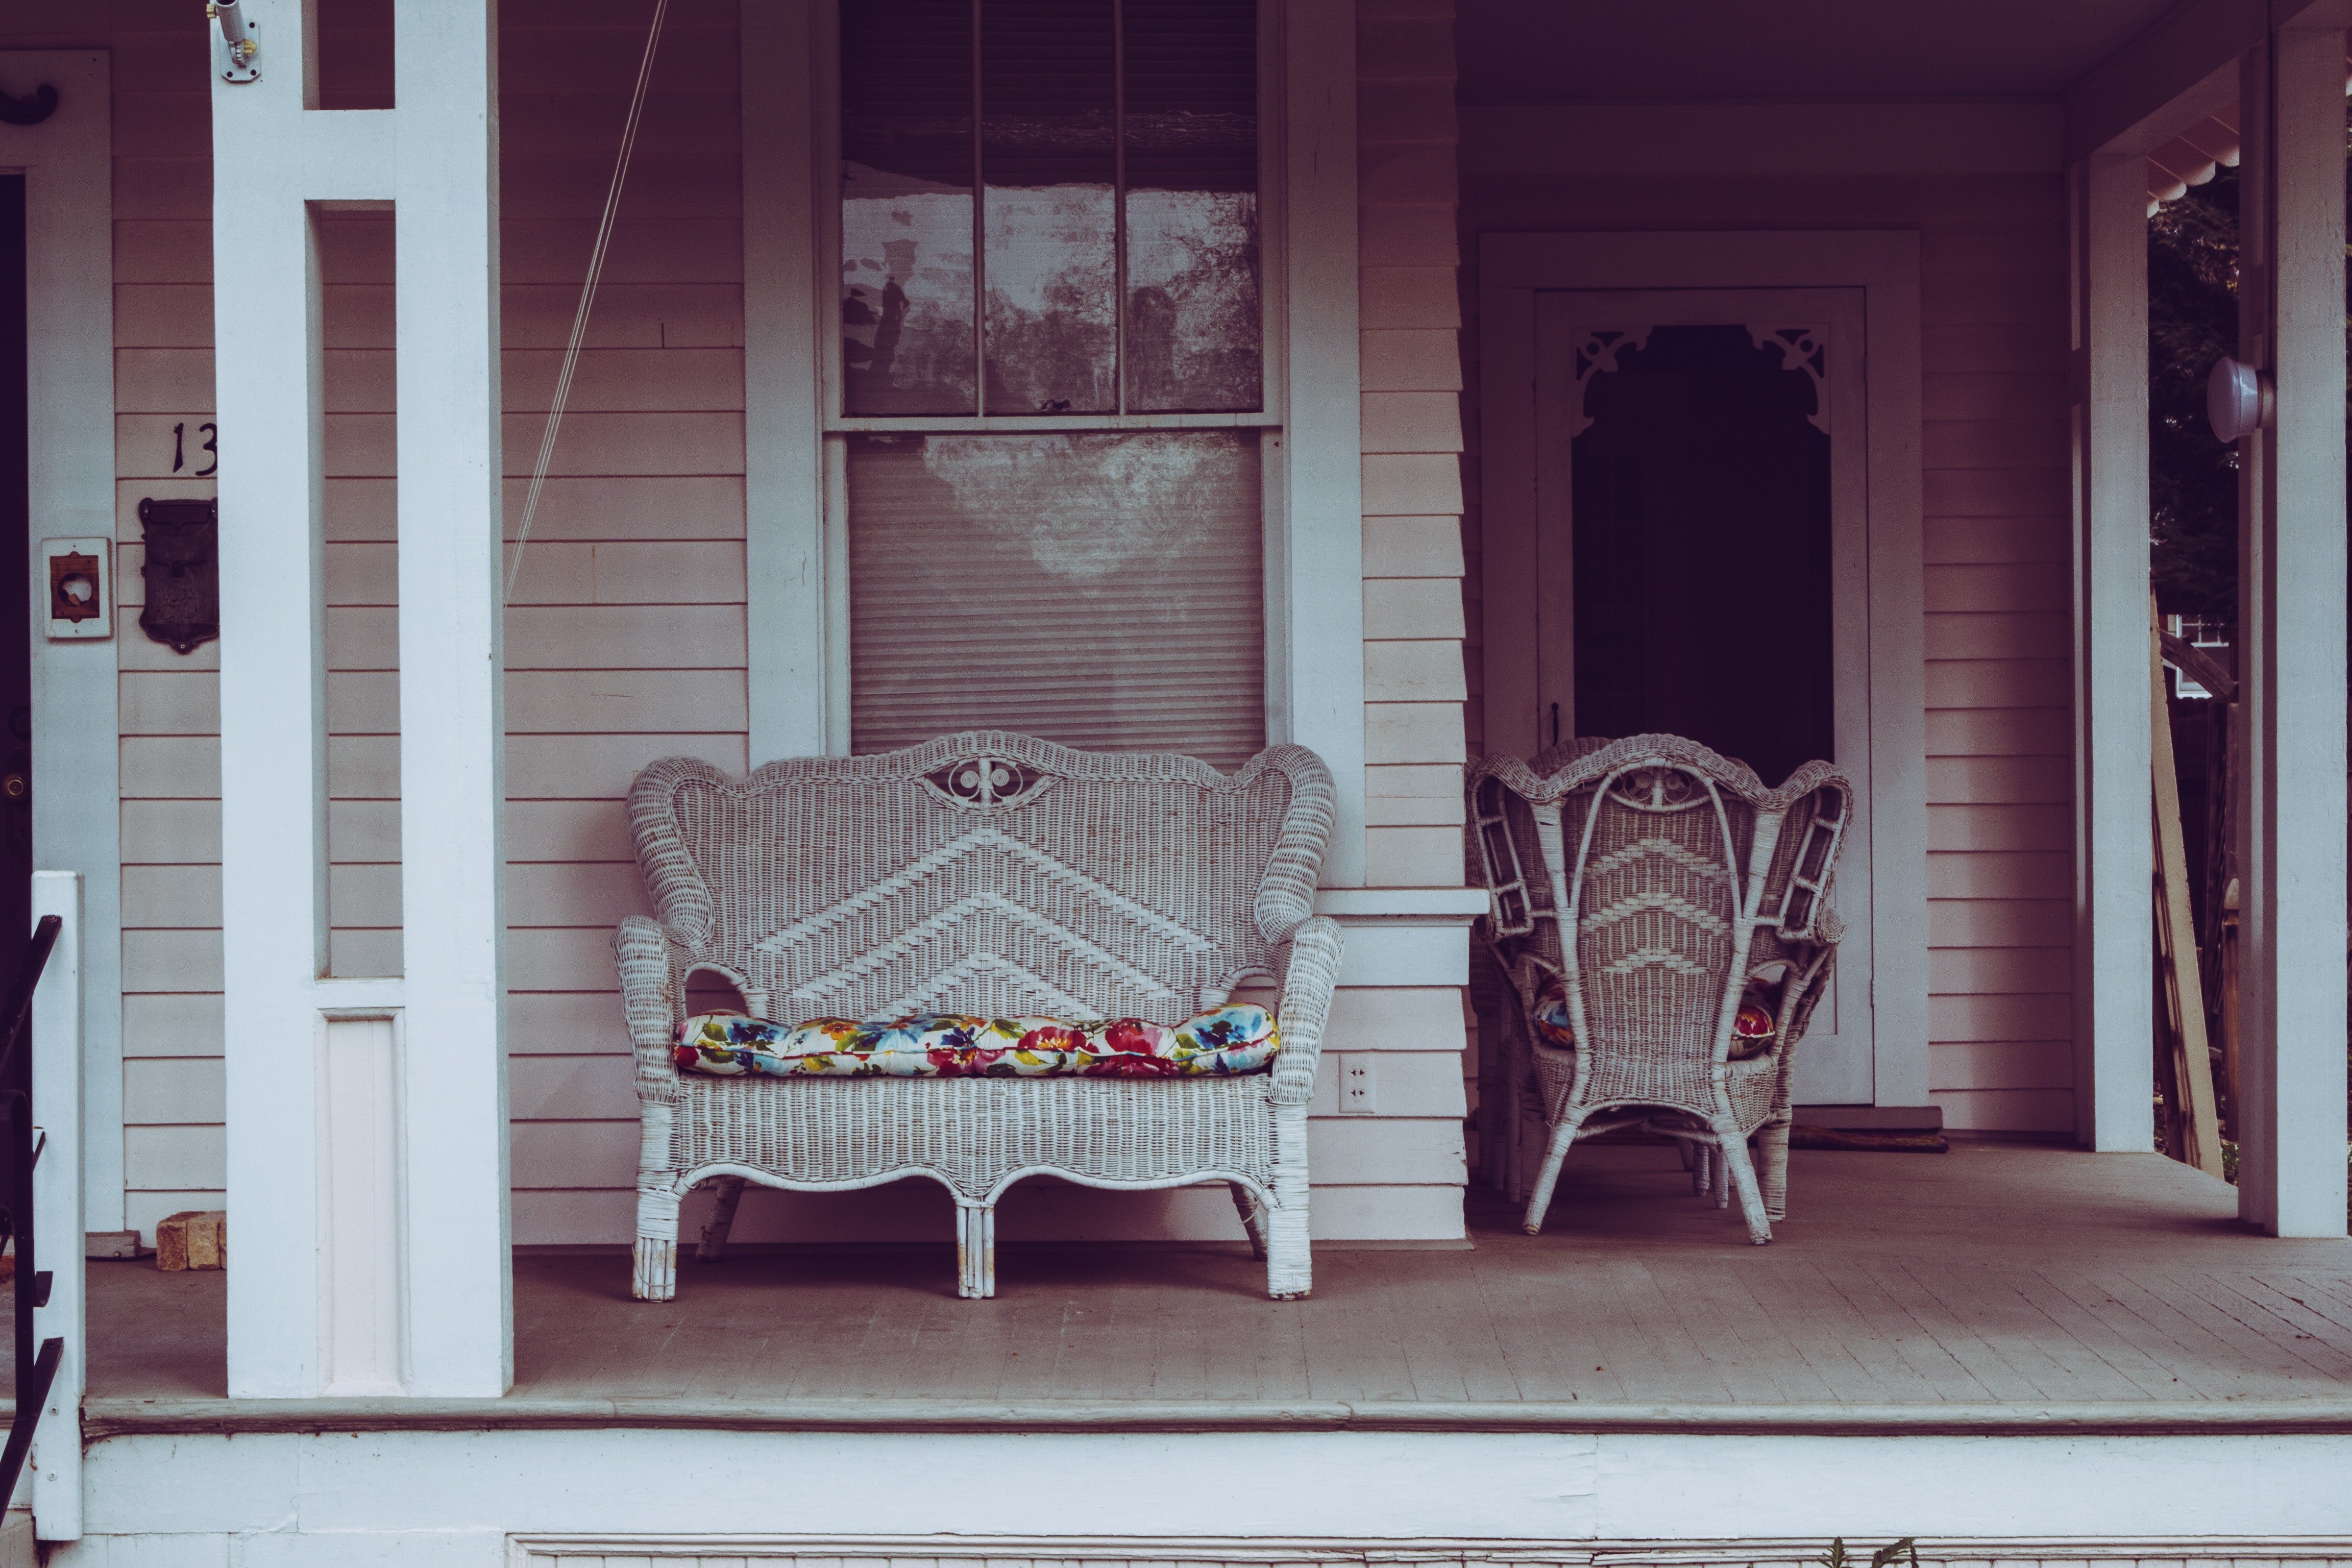 Jacob walked up the front porch to check on Mrs. Jacobson. | Photo: Pexels